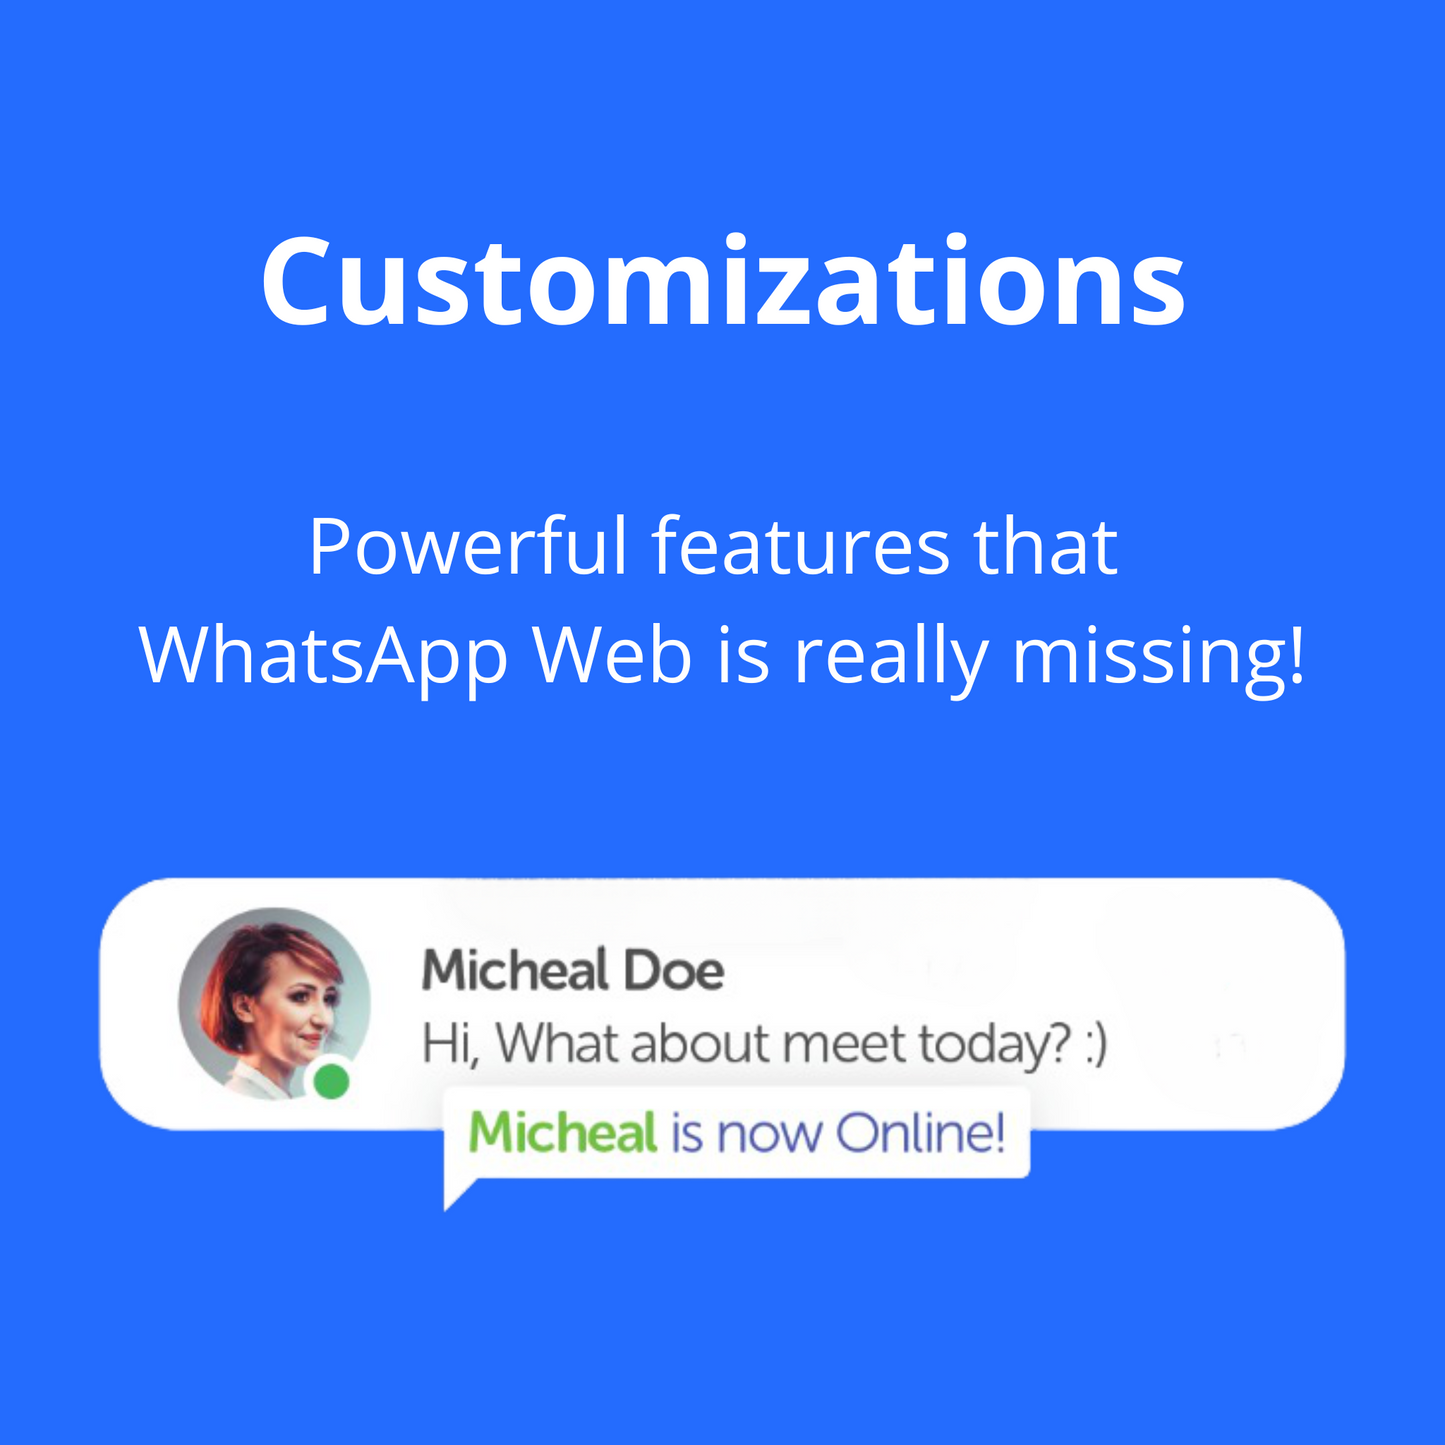 WA Web Plus - Automate your WhatsApp tasks is really missing from Whatsapp customizations powerful features Golden Value SG.